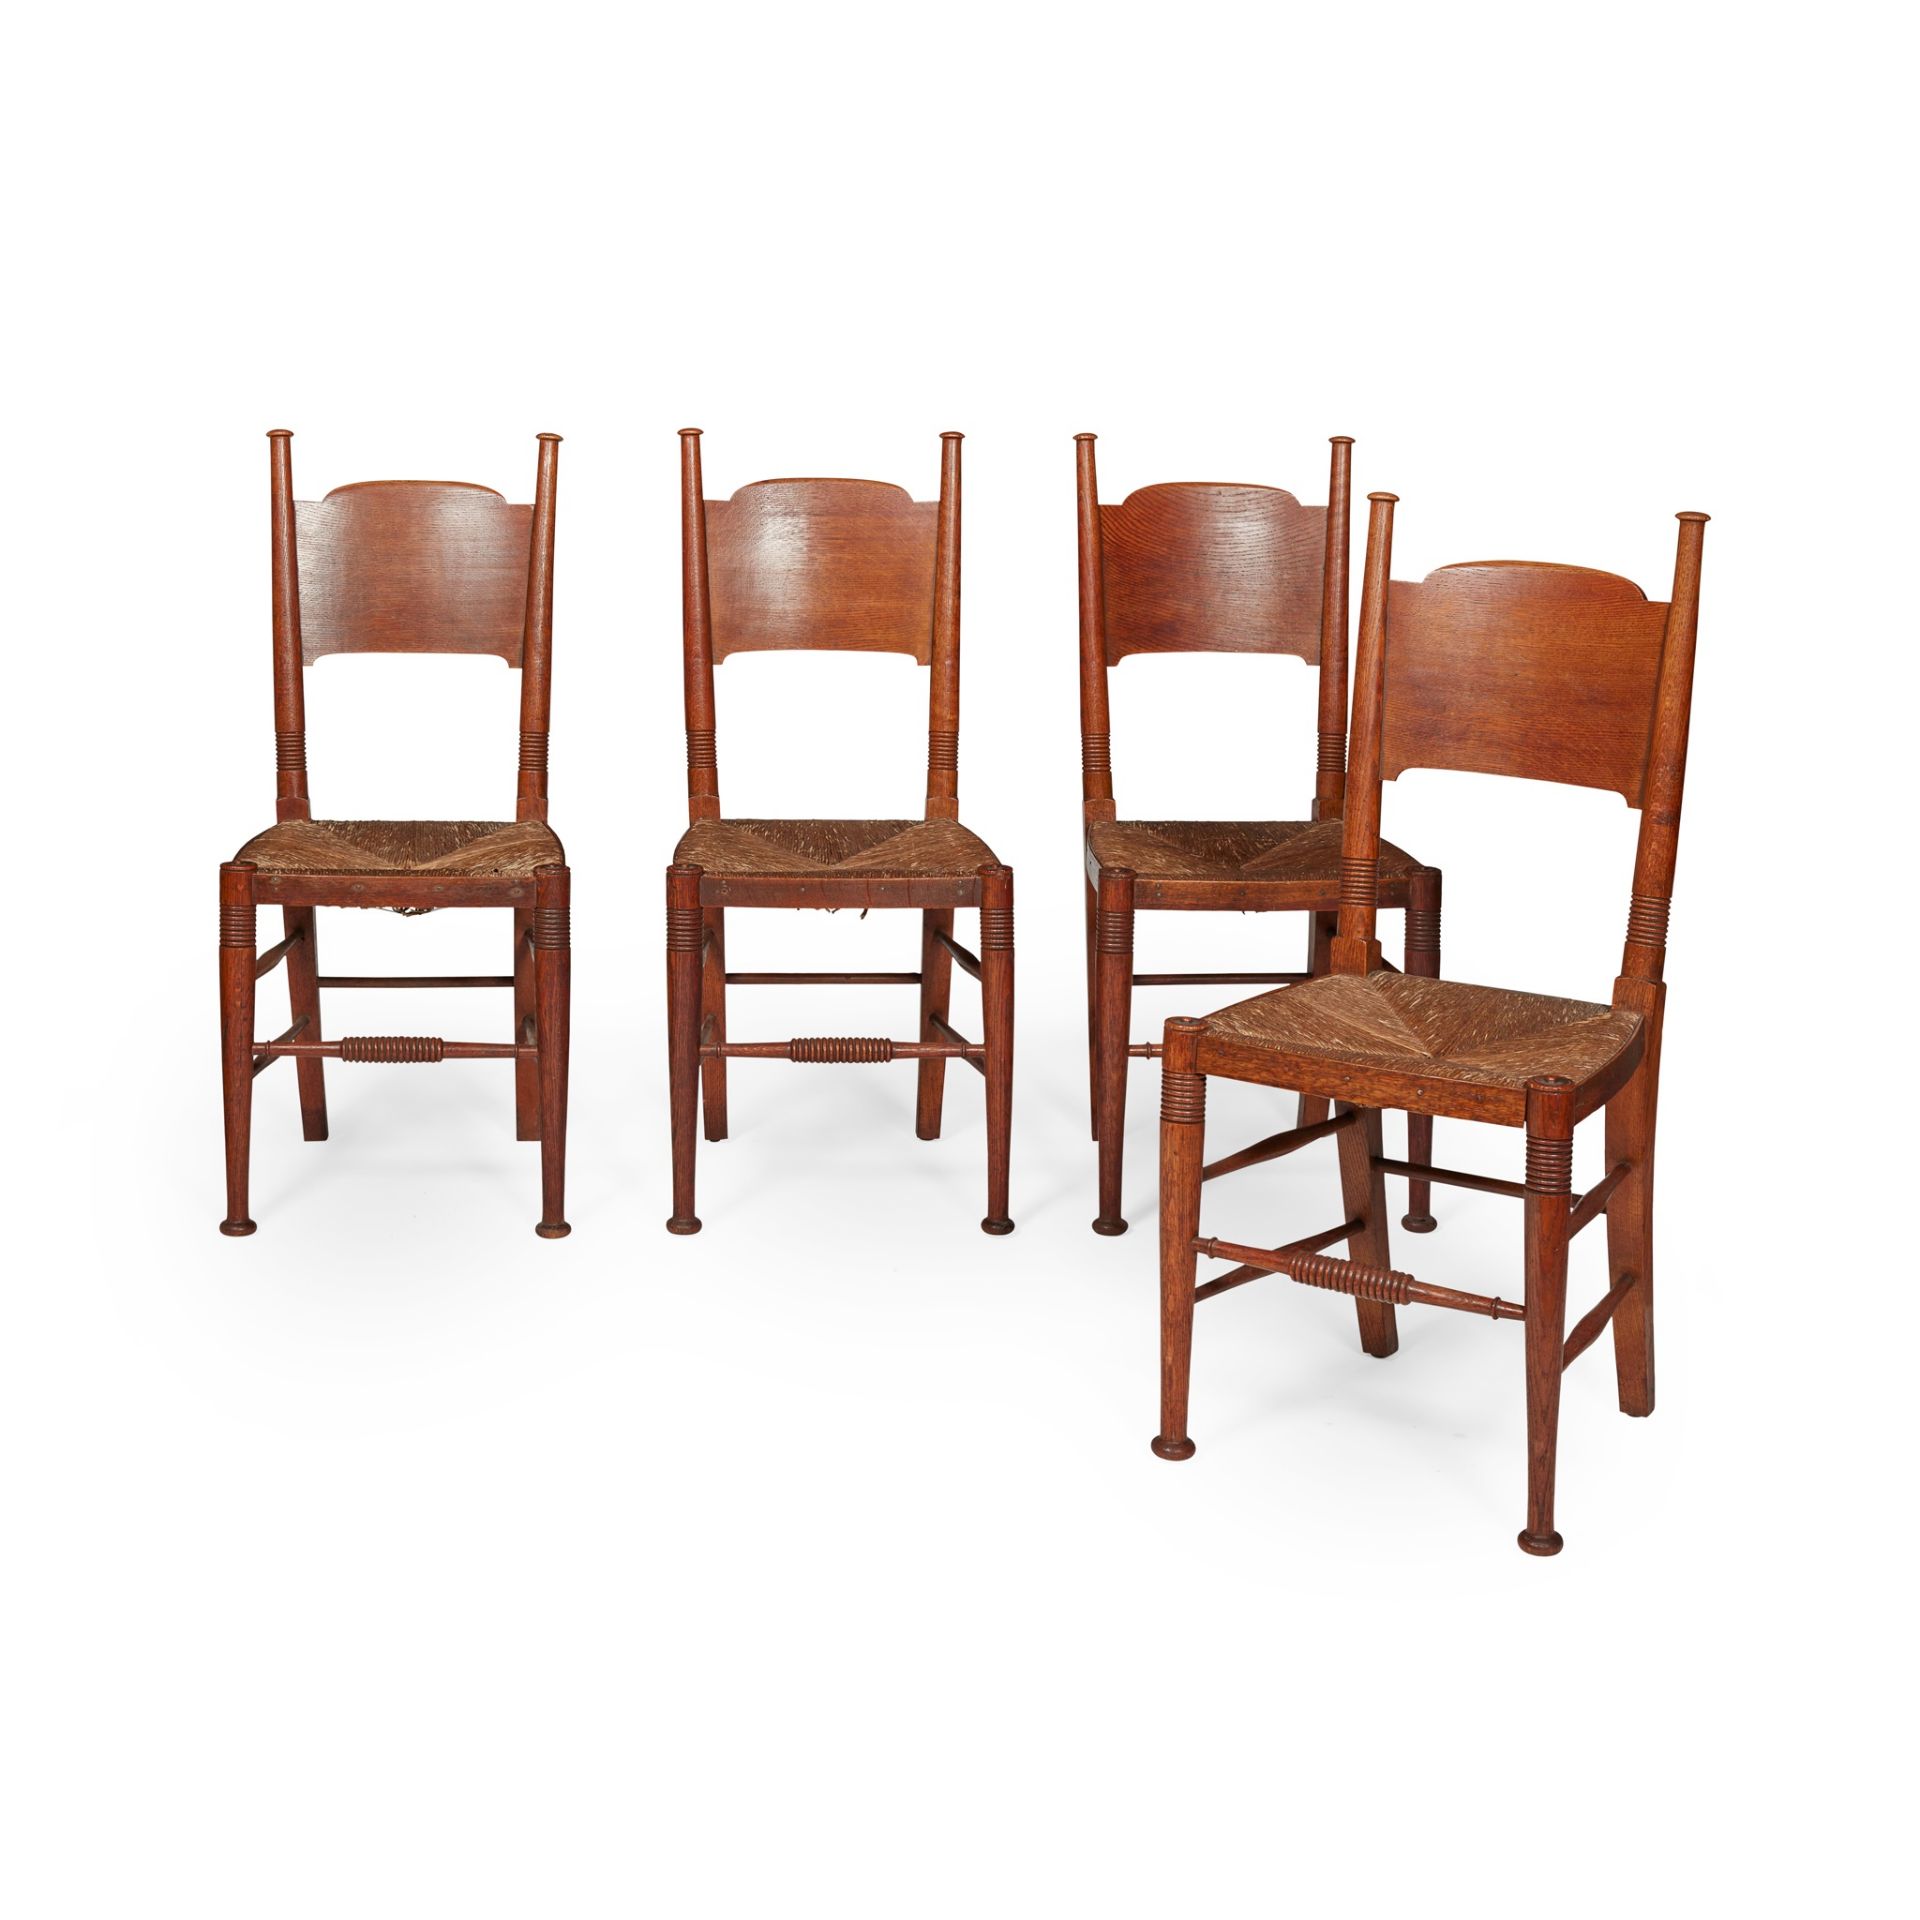 WILLIAM BIRCH, HIGH WYCOMBE SET OF FOUR ARTS & CRAFTS CHAIRS, CIRCA 1900